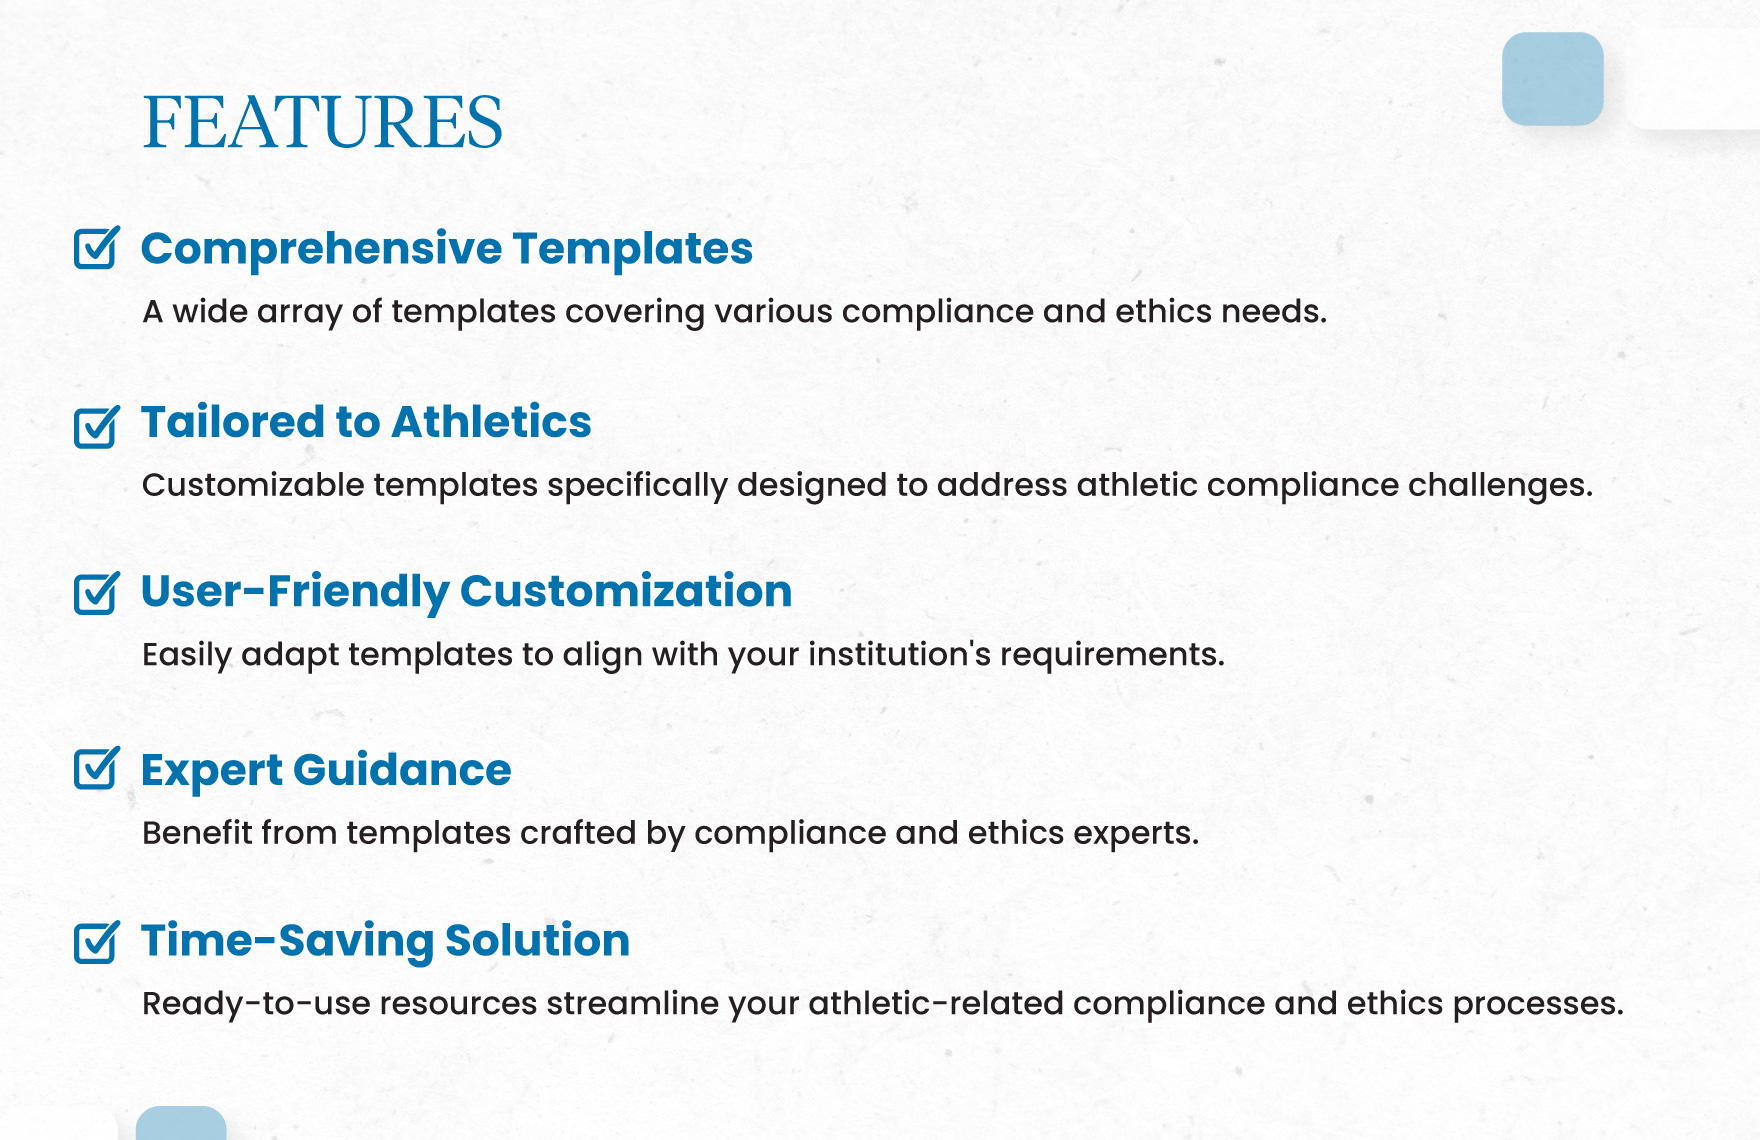 Student-Athlete Code of Conduct Template